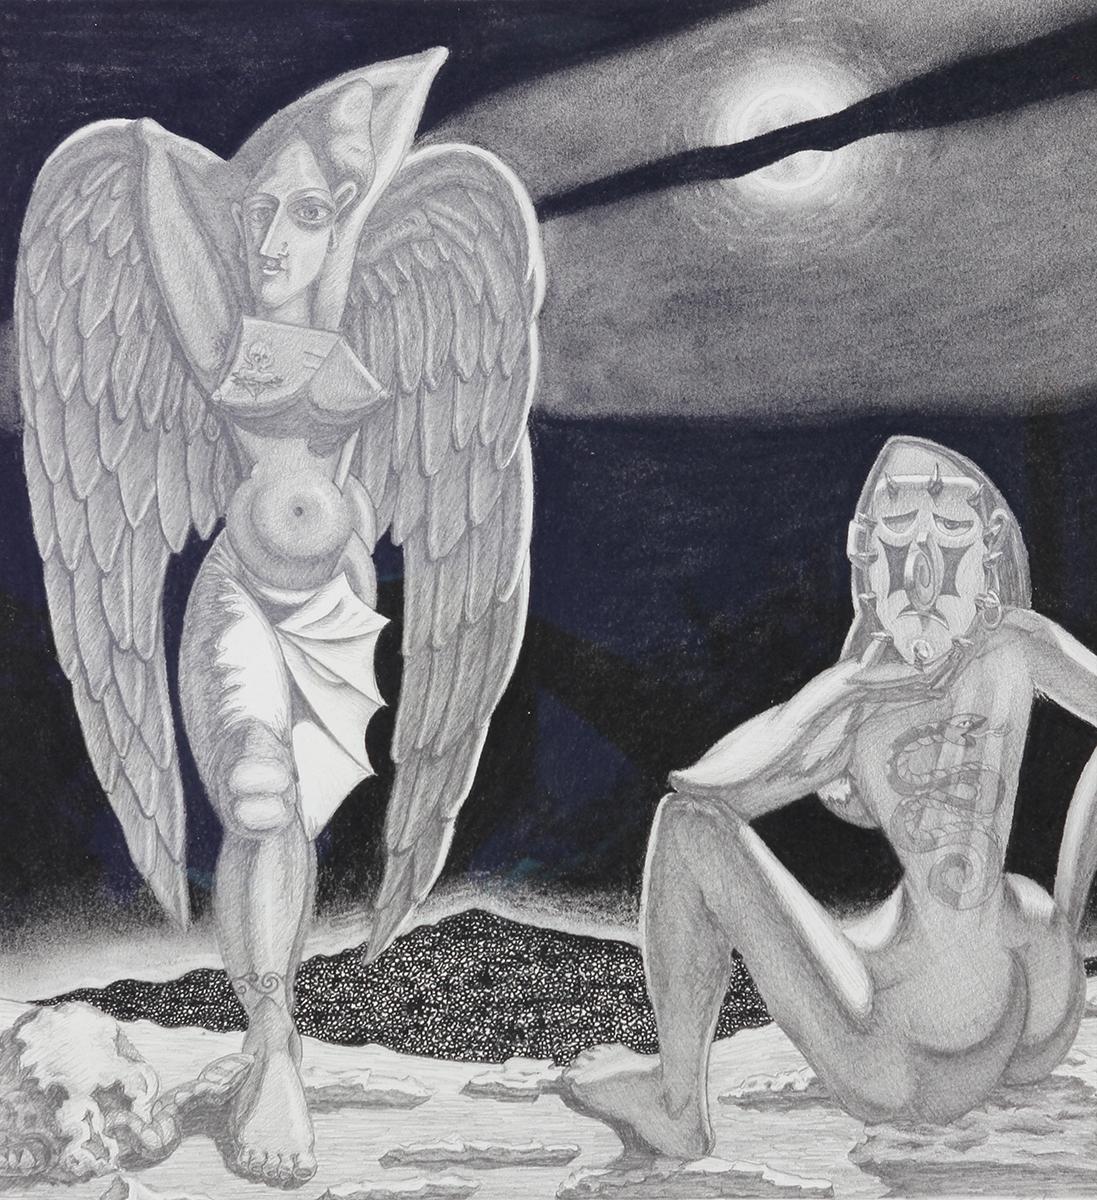 Grayscale graphite and charcoal drawing on paper by Texas artist Benito Huerta. Abstract figurative drawing in the style of Picasso depicting two women figures: one on the left with a pair of angel wings facing front and another on the right side